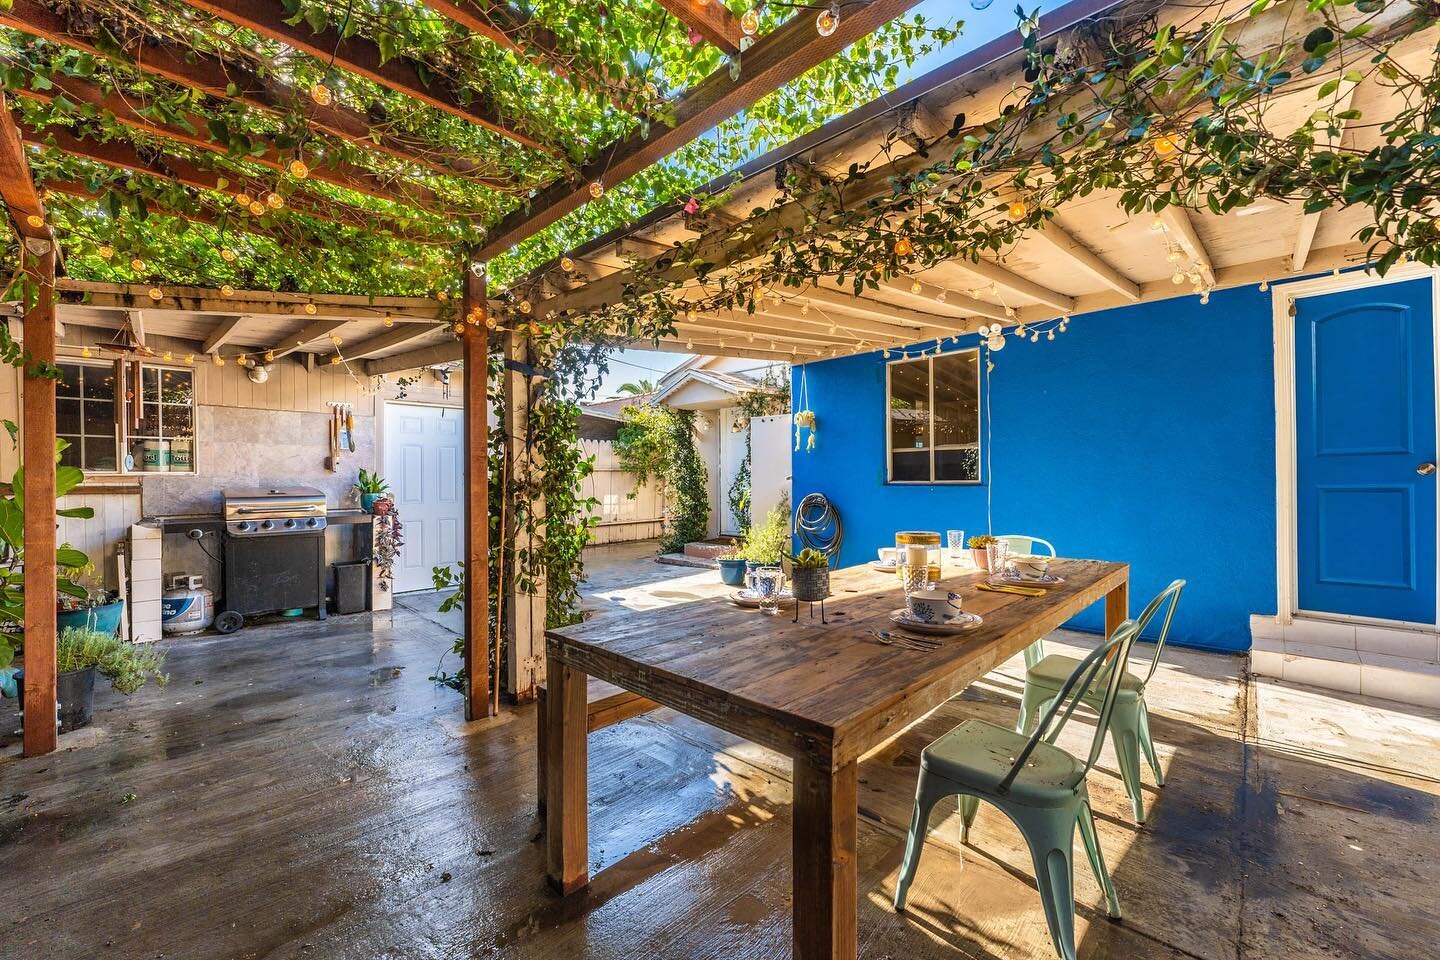 Would you rather hang out in this backyard for lunch or for an evening dinner? 🔥🔥
Swipe over to see the twilight shot 🔥🔥

Looking for high quality photos/video for your next listing? DM @inlandrealestatephotography for details or go to www.inland